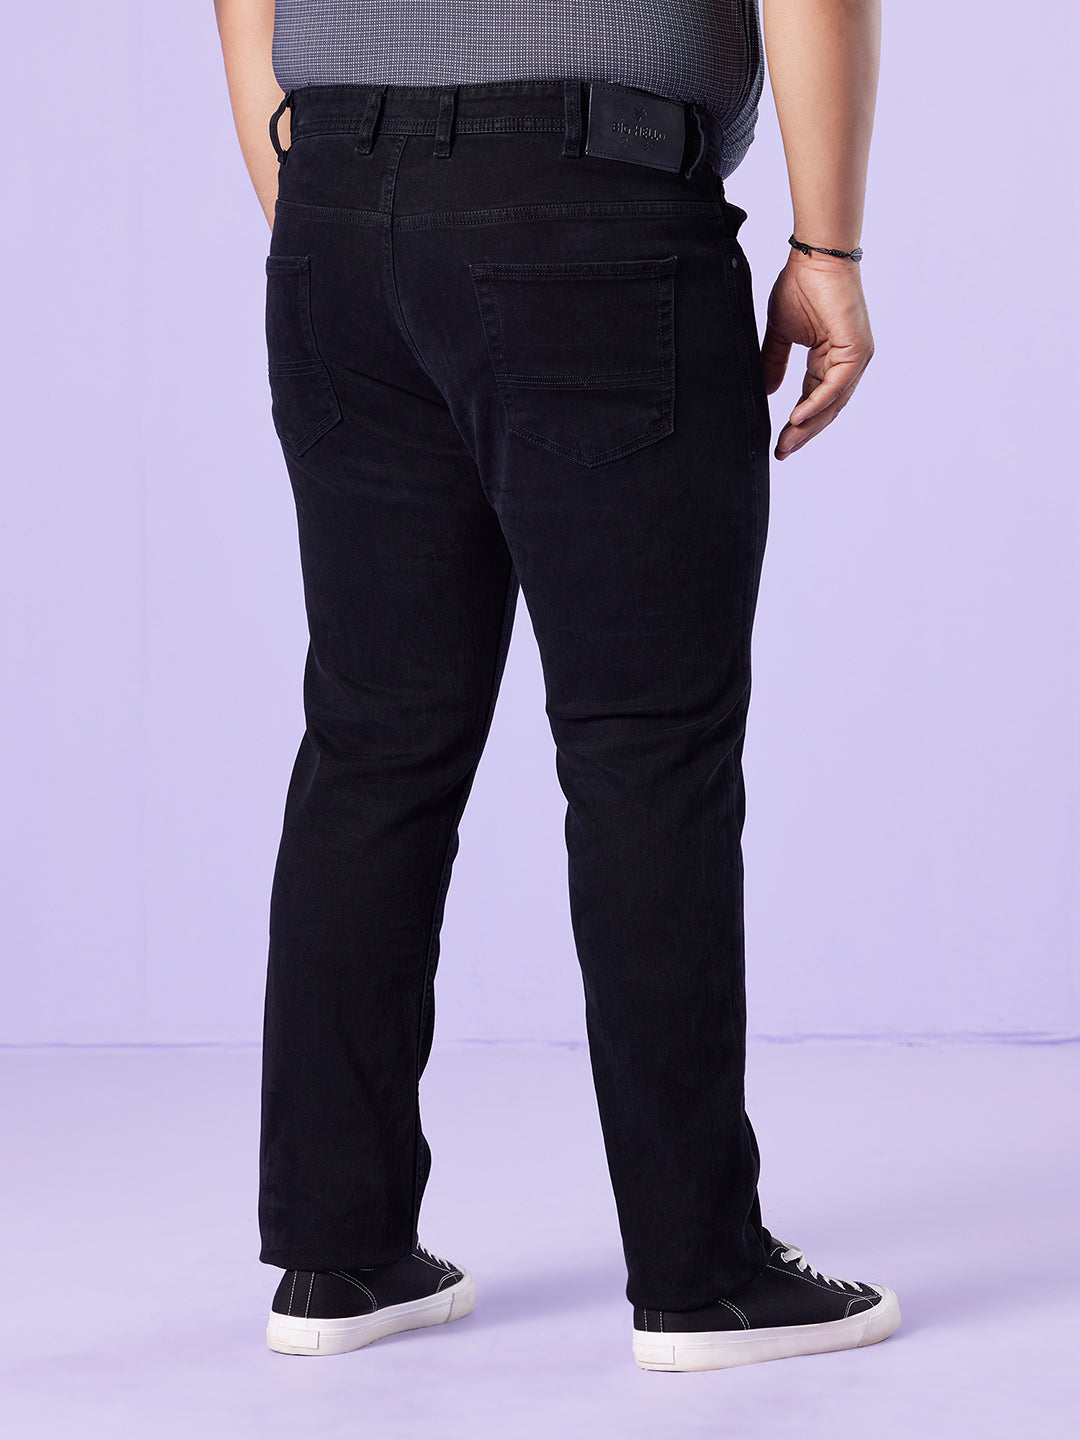 Rinse Wash Kevin Fit Cotton Jeans